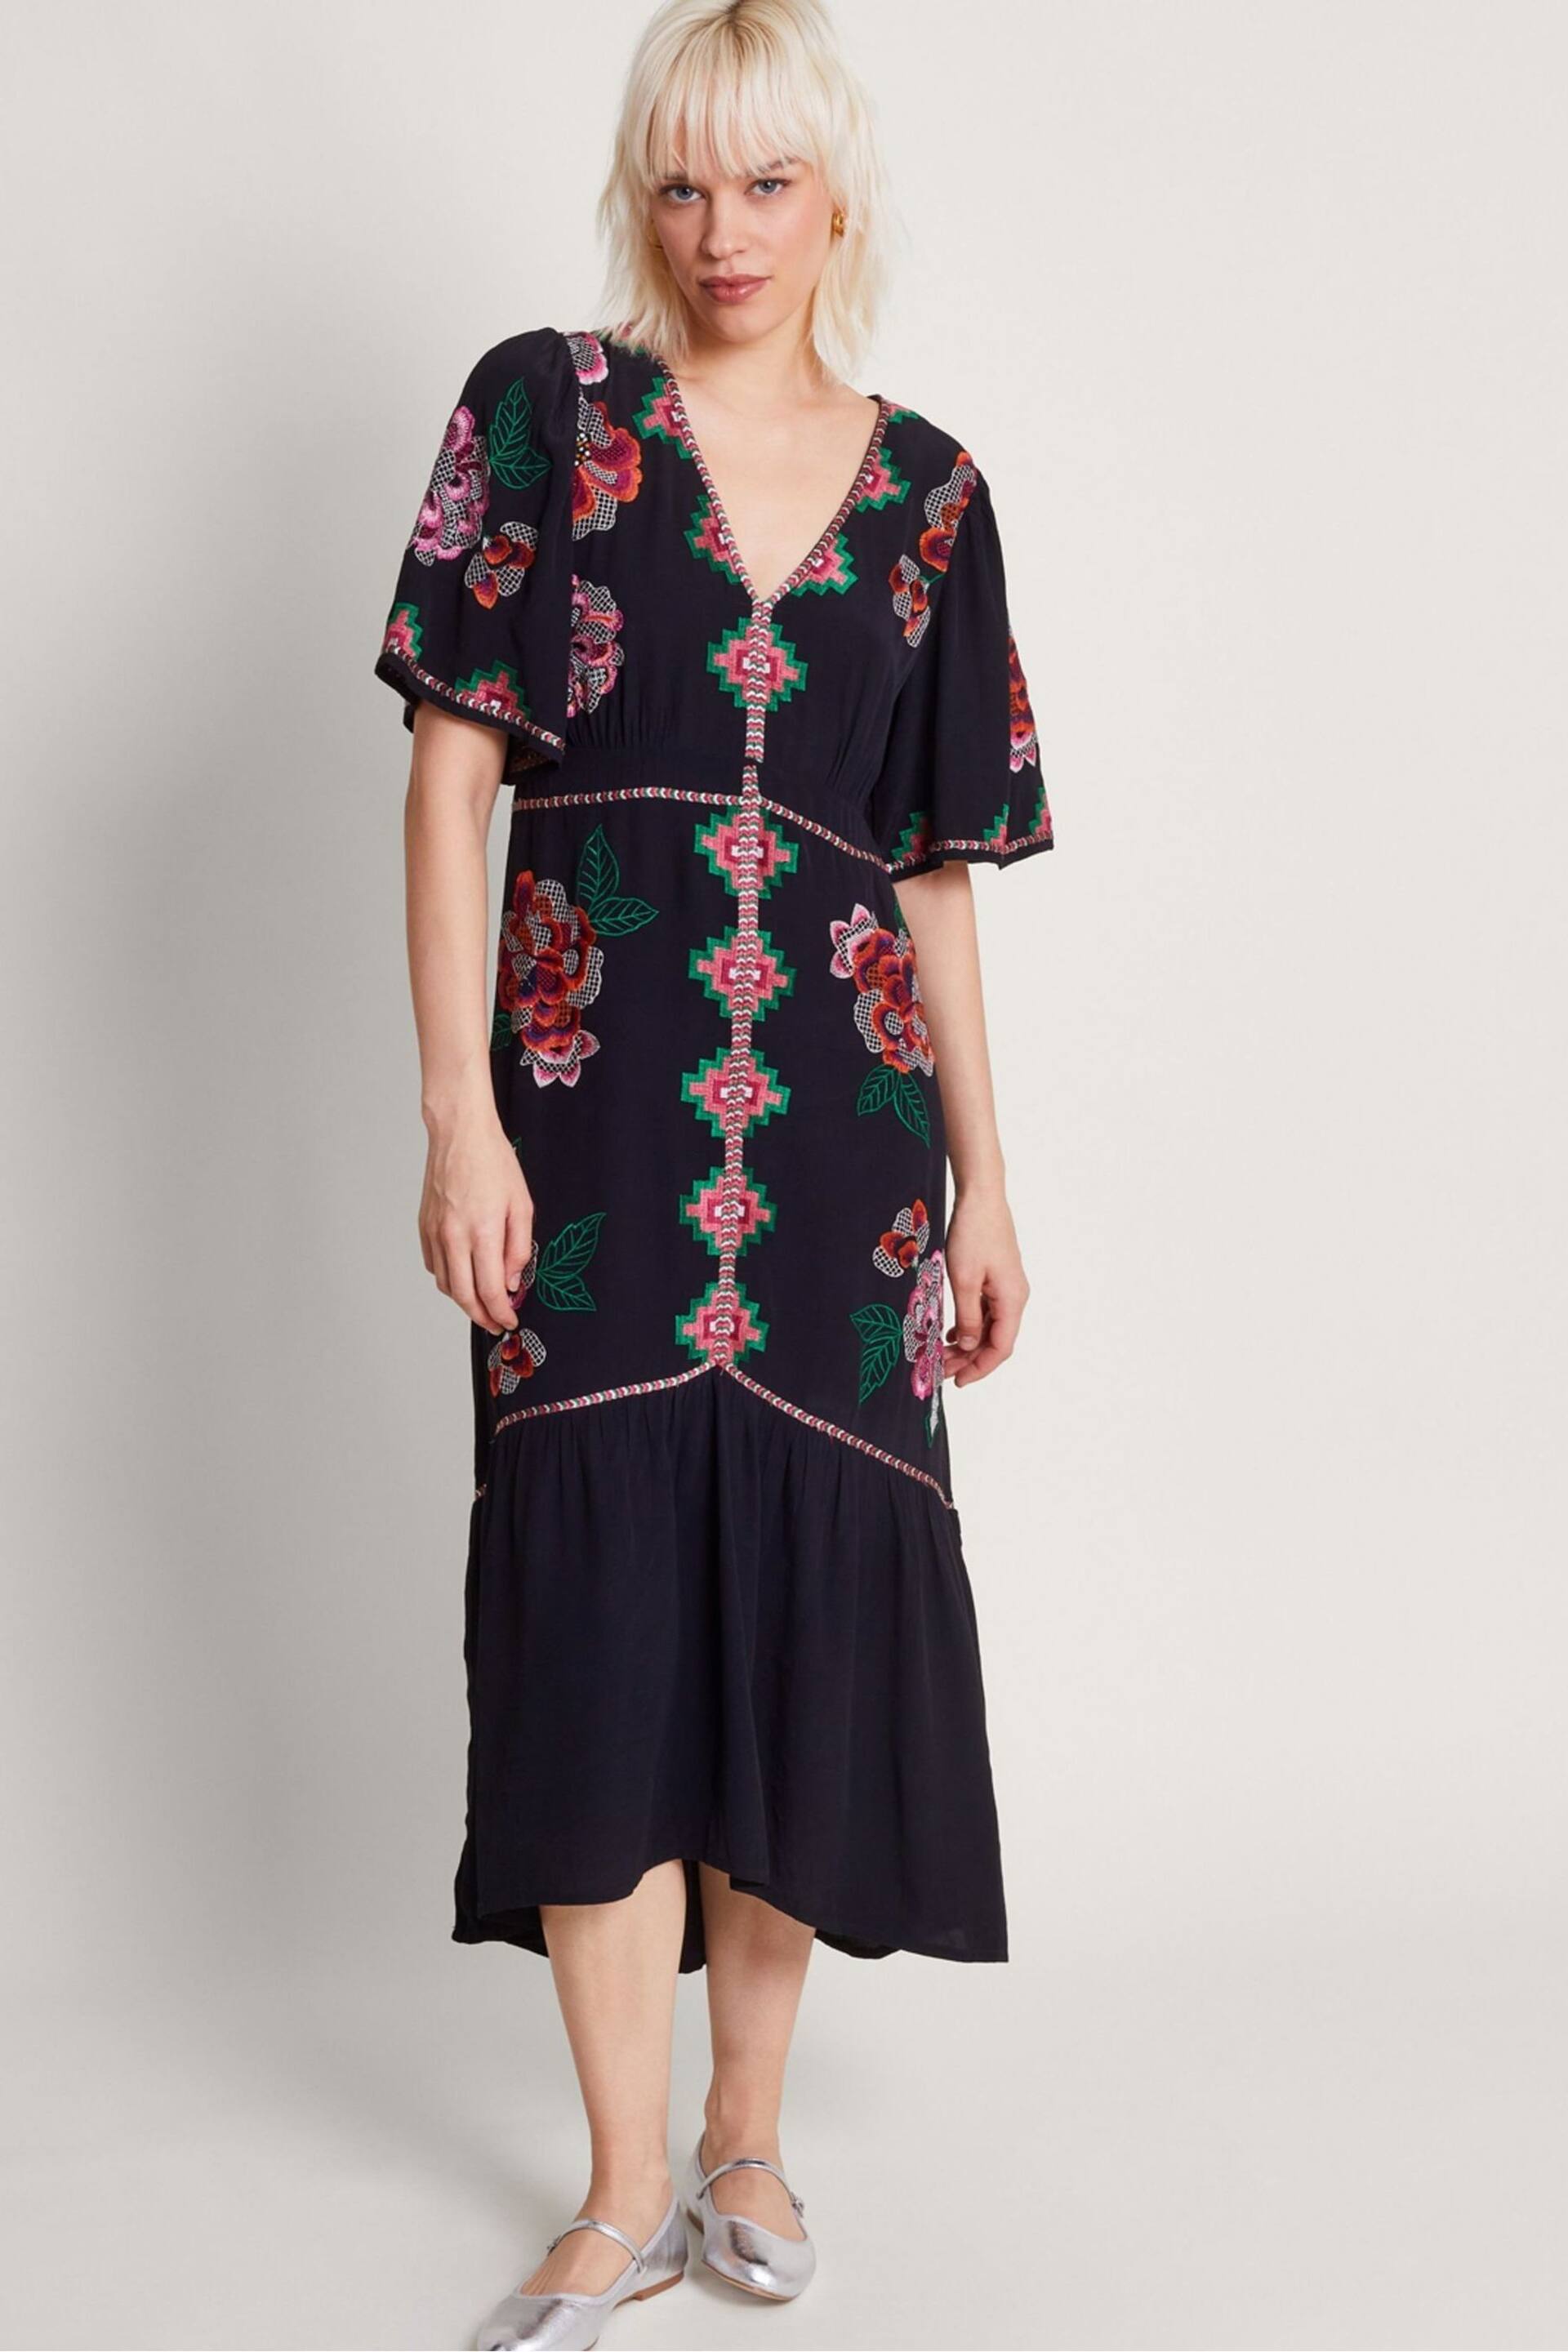 Monsoon Black Everly Embroidered Tea Dress - Image 1 of 5